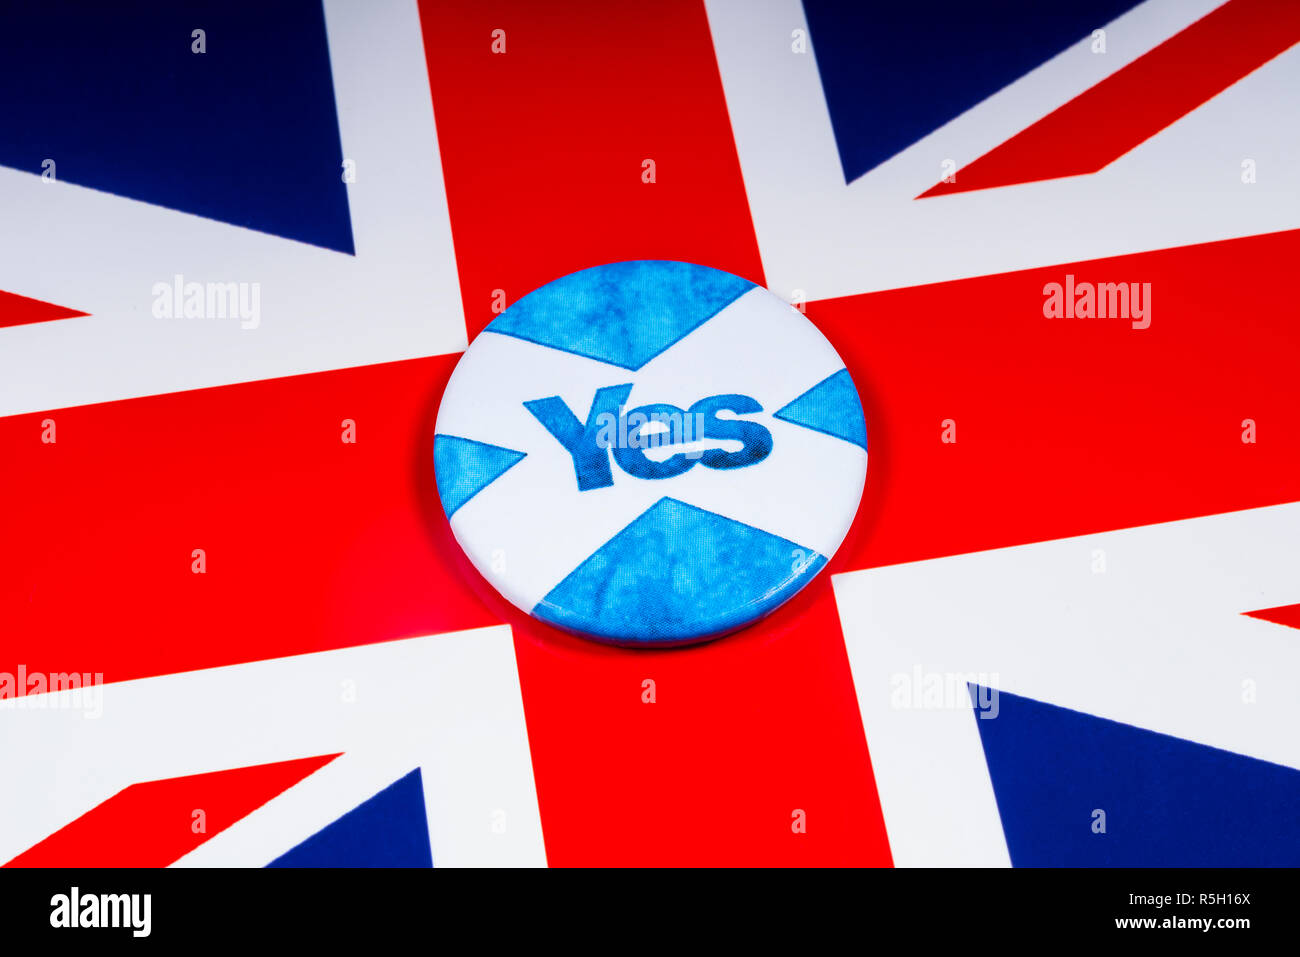 London, UK - November 18th 2018: A pin badge portraying the Scottish flag and a Yes Vote for the Scottish Independence Referendum, pictured over a UK  Stock Photo